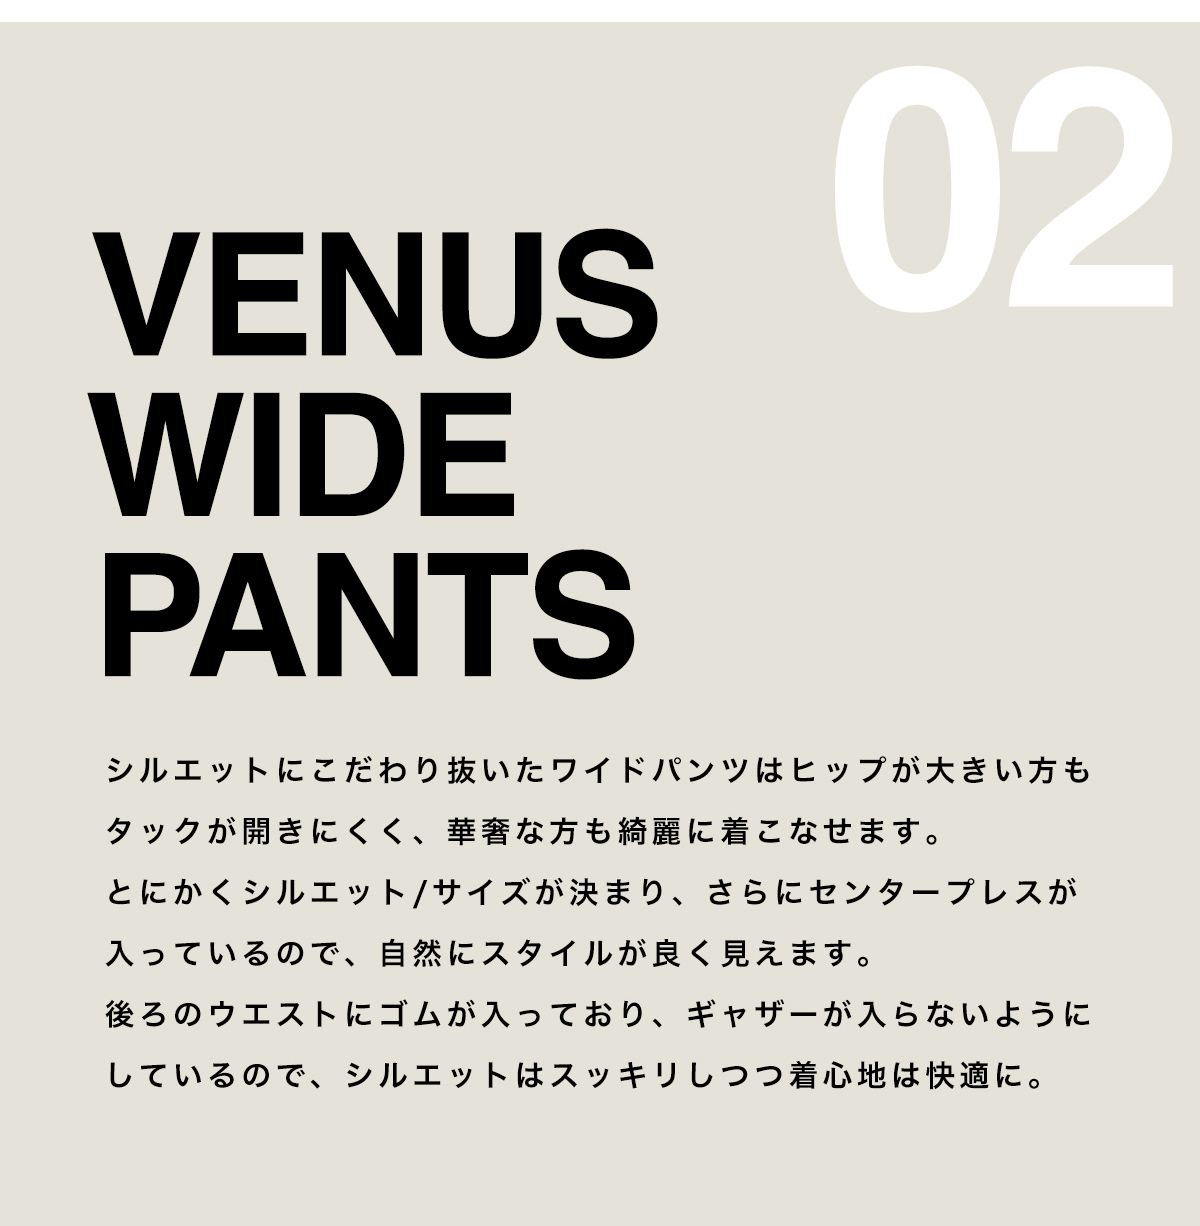 VENUS Series TAPERED PANTS／WIDE PANTS／AZUL BY MOUSSY